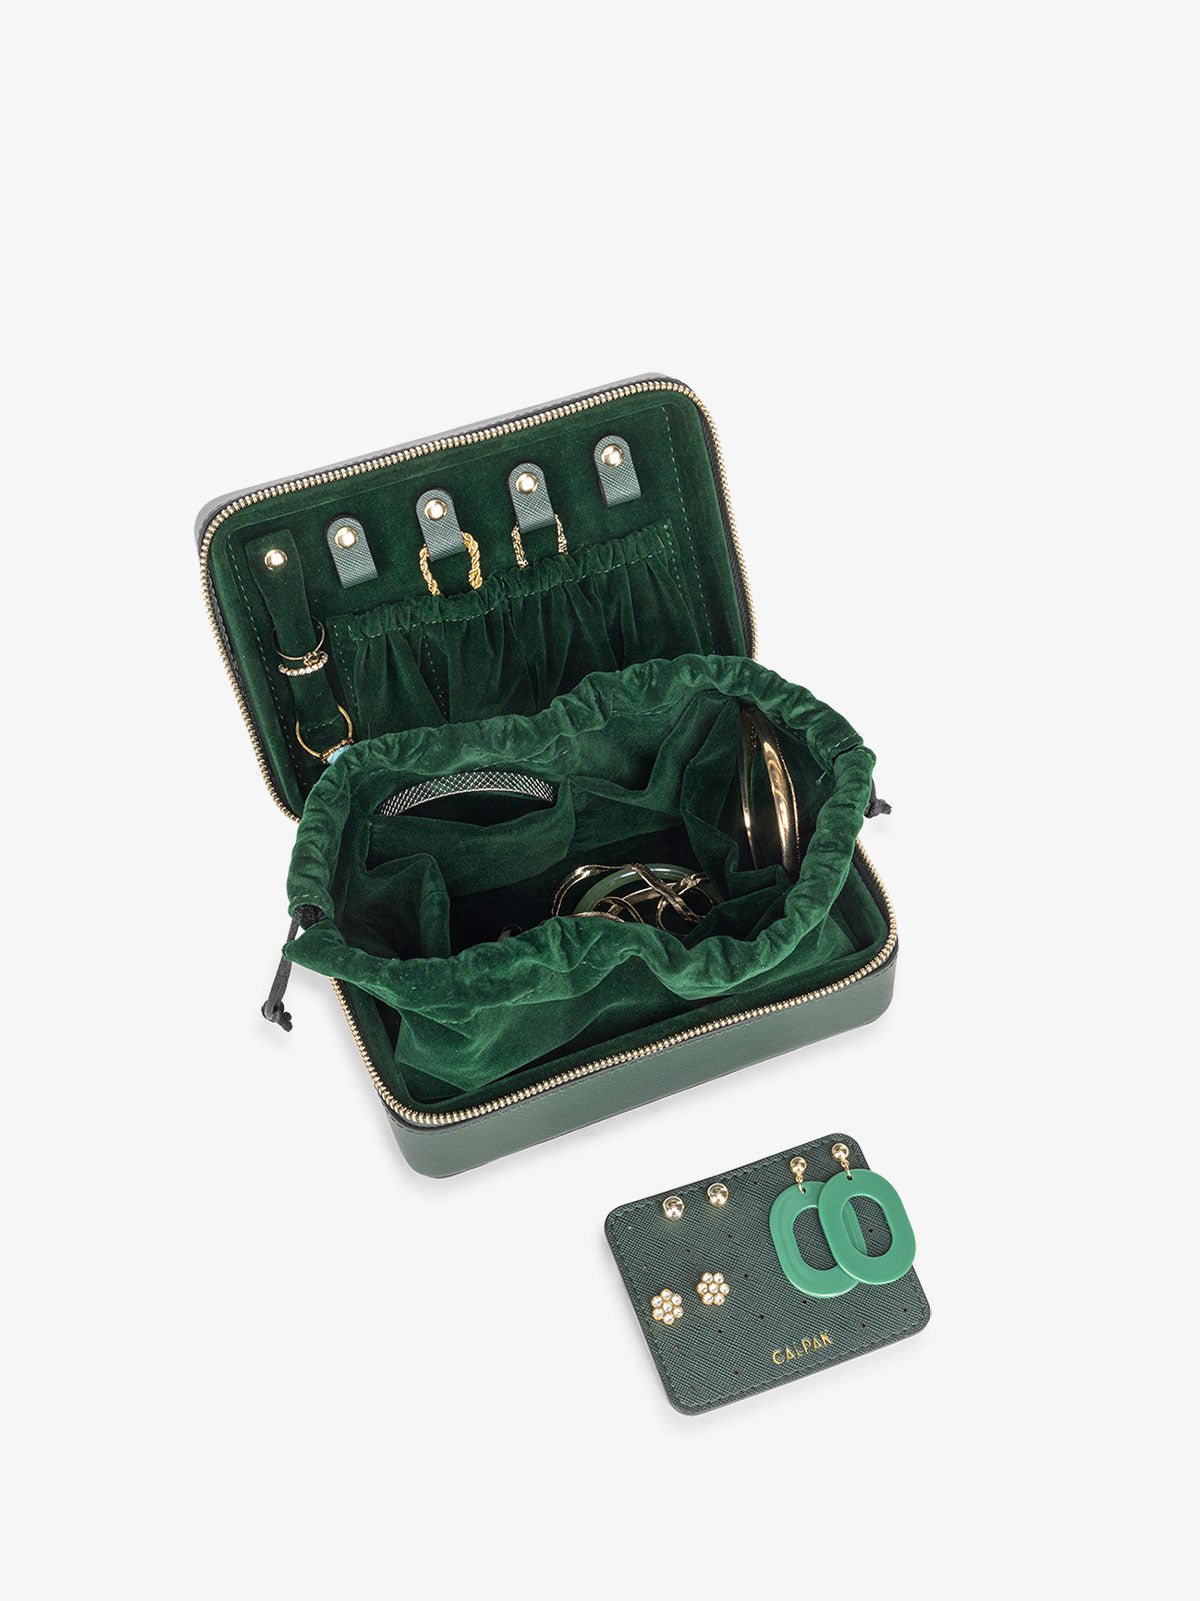 CALPAK zippered jewelry box for necklaces rings and earrings in emerald green